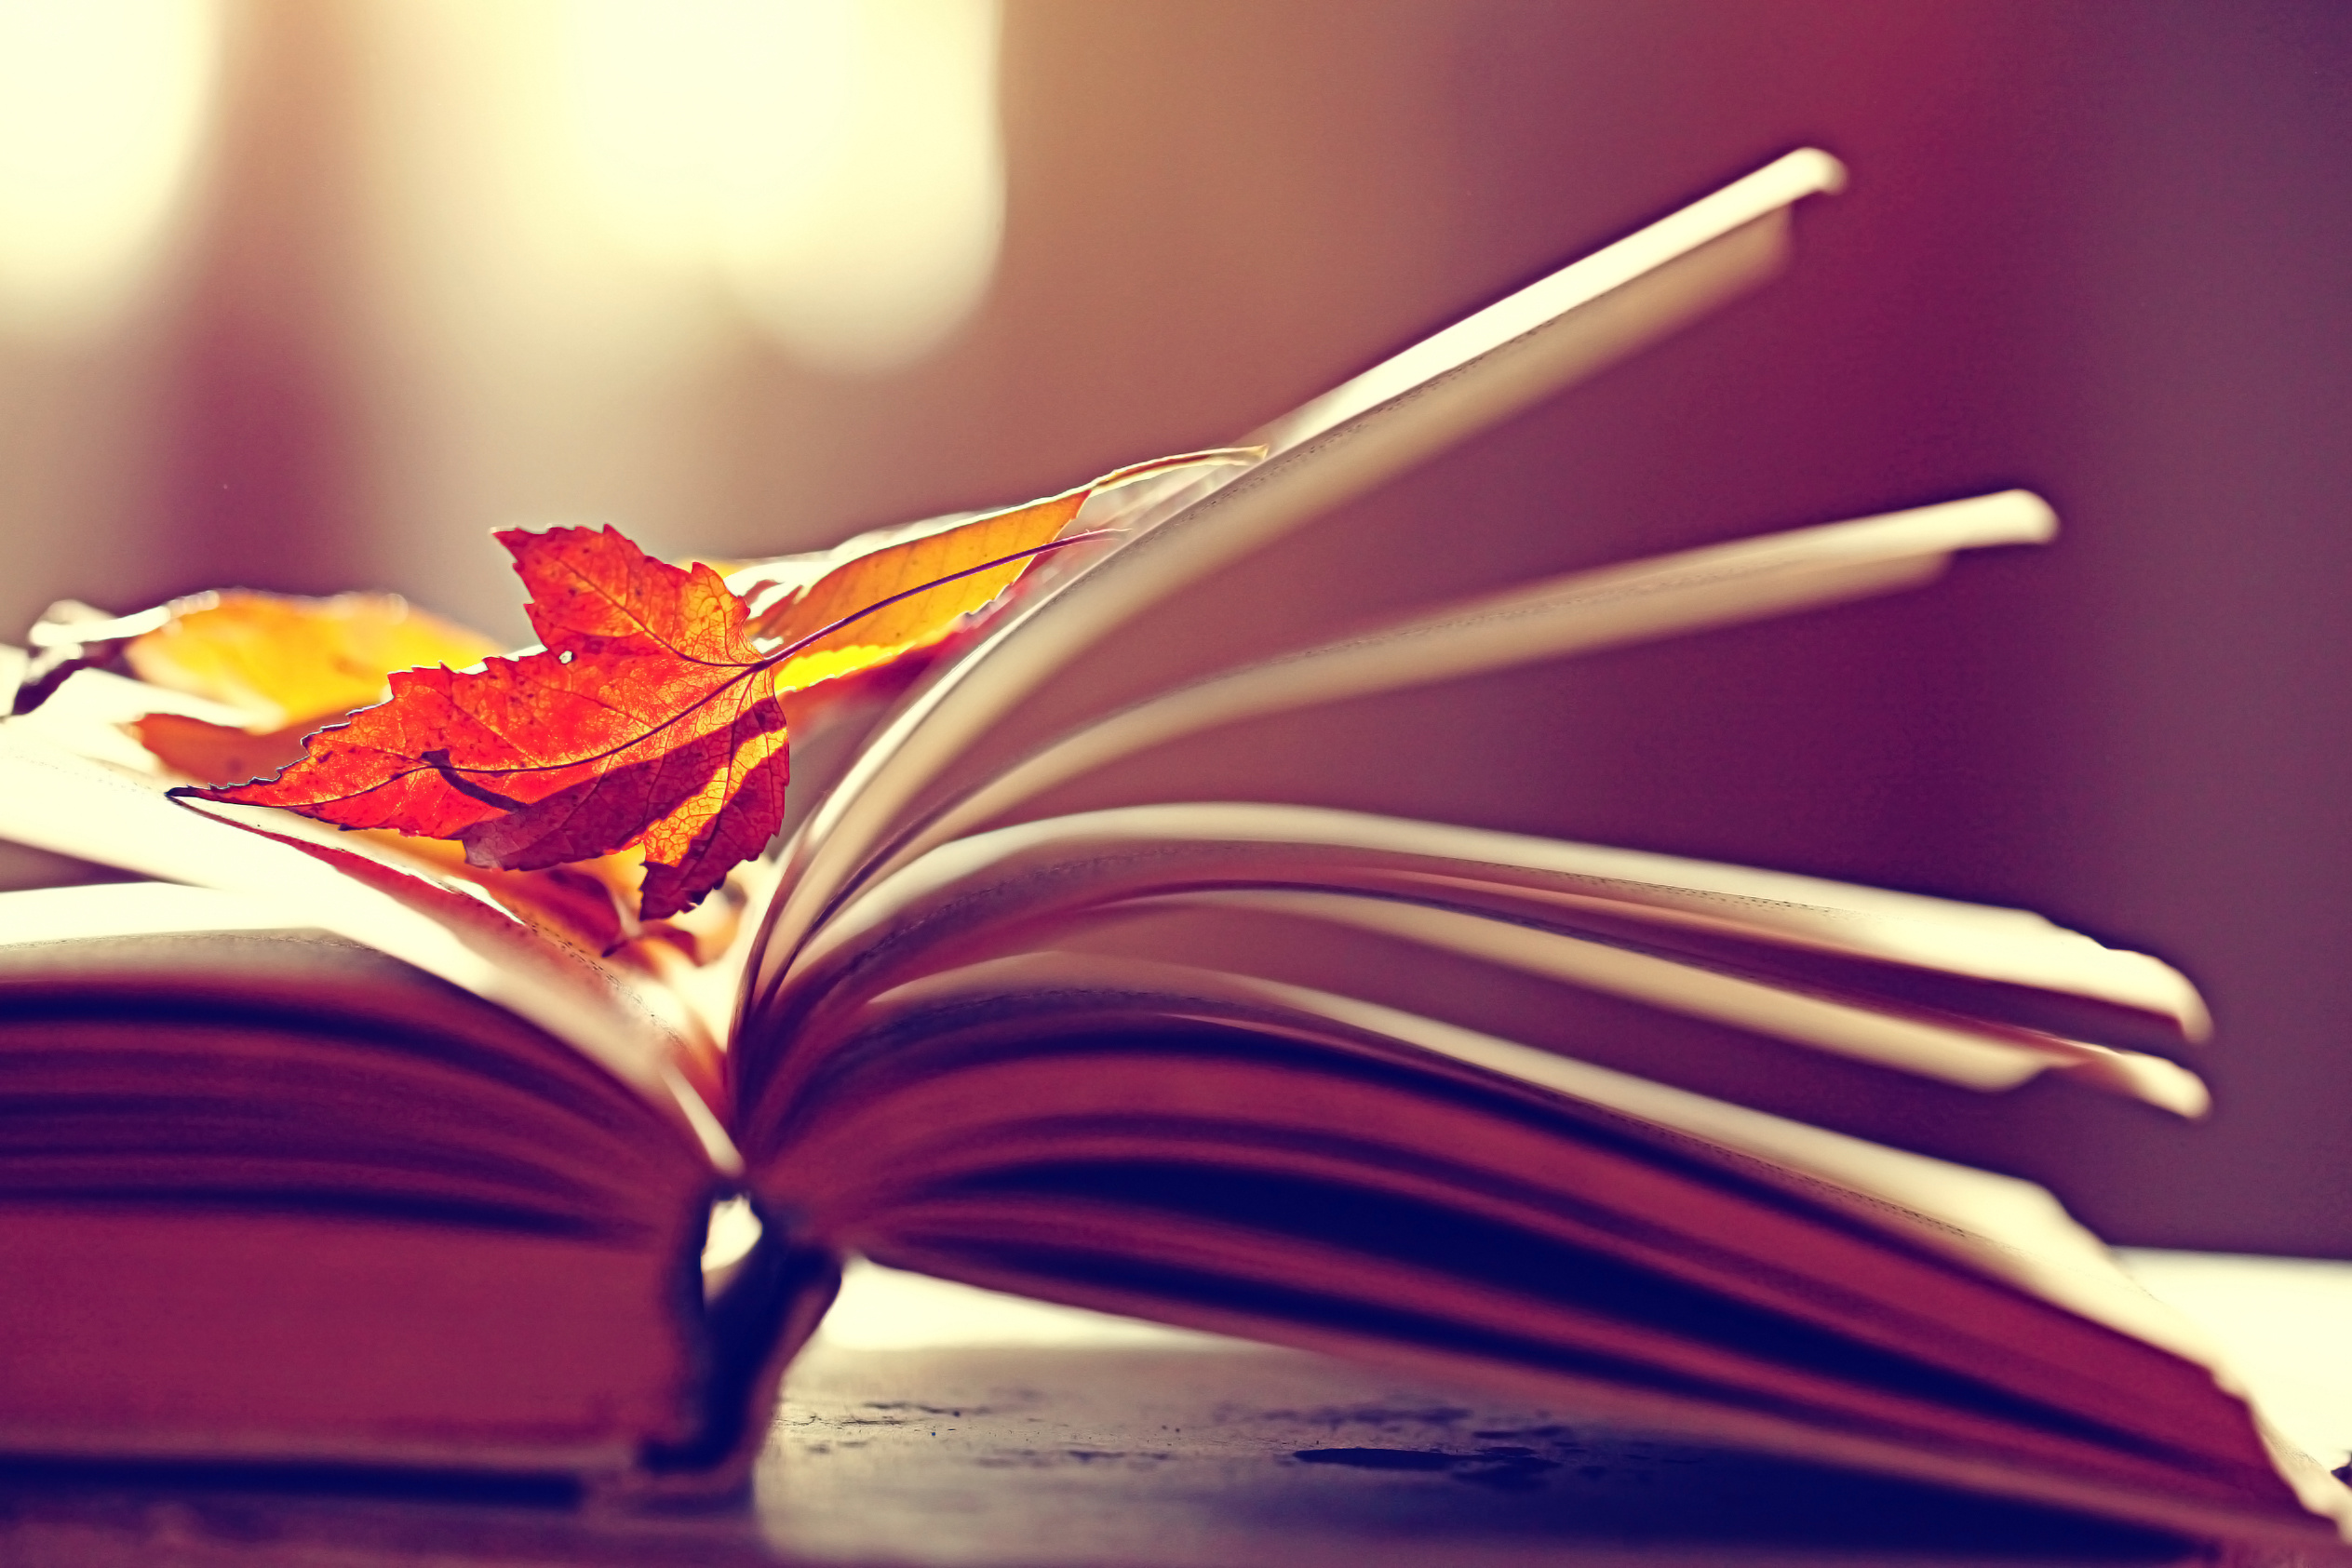 book-pages-with-autumn-leaves-as-bookmarks